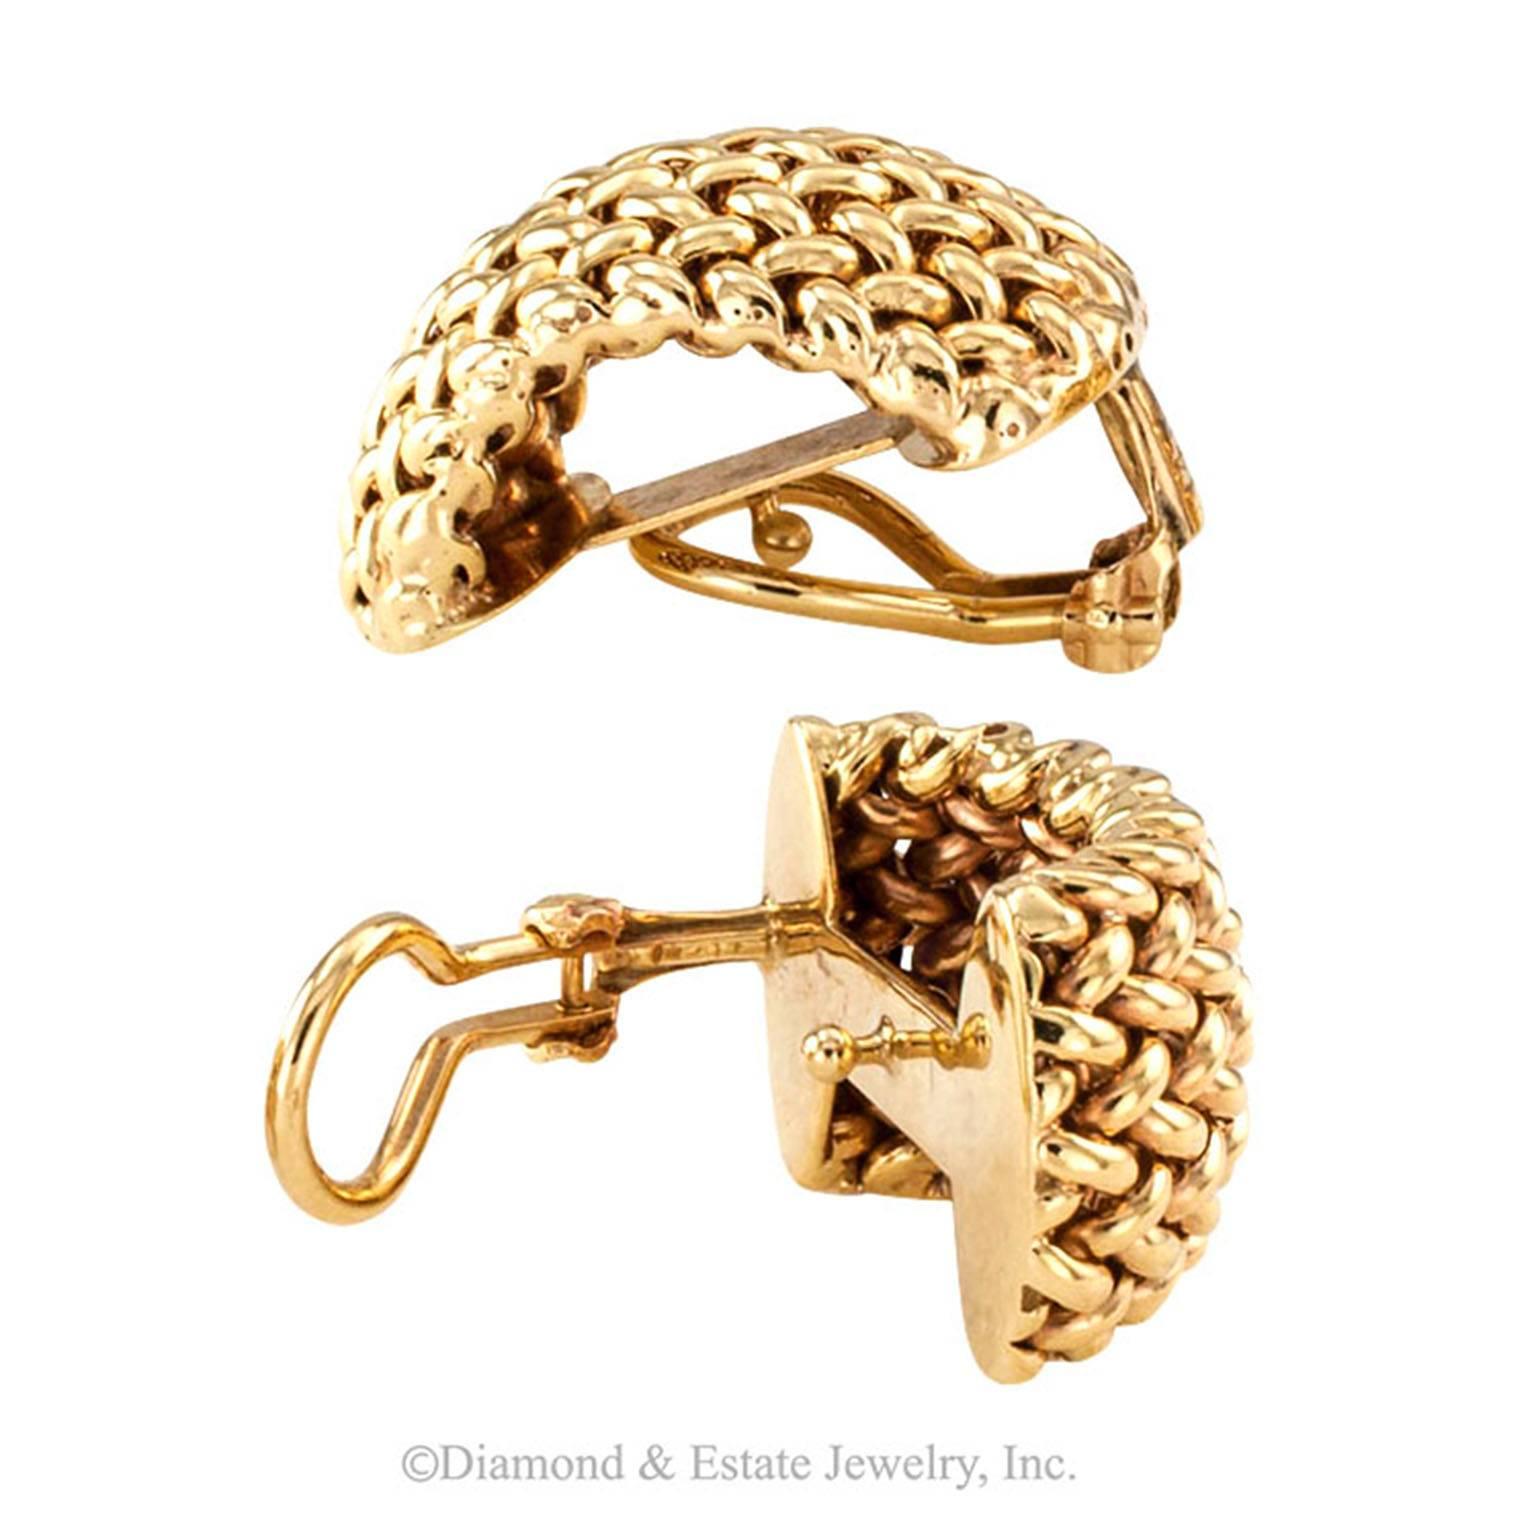 Gold Mesh Half Hoop Ear Clips

Good looking is only the beginning.  These gold mesh earrings are also very stylish and comfortable on the ear... with their ever so slight half hoop domed curvature and angular sides, they could easily become your